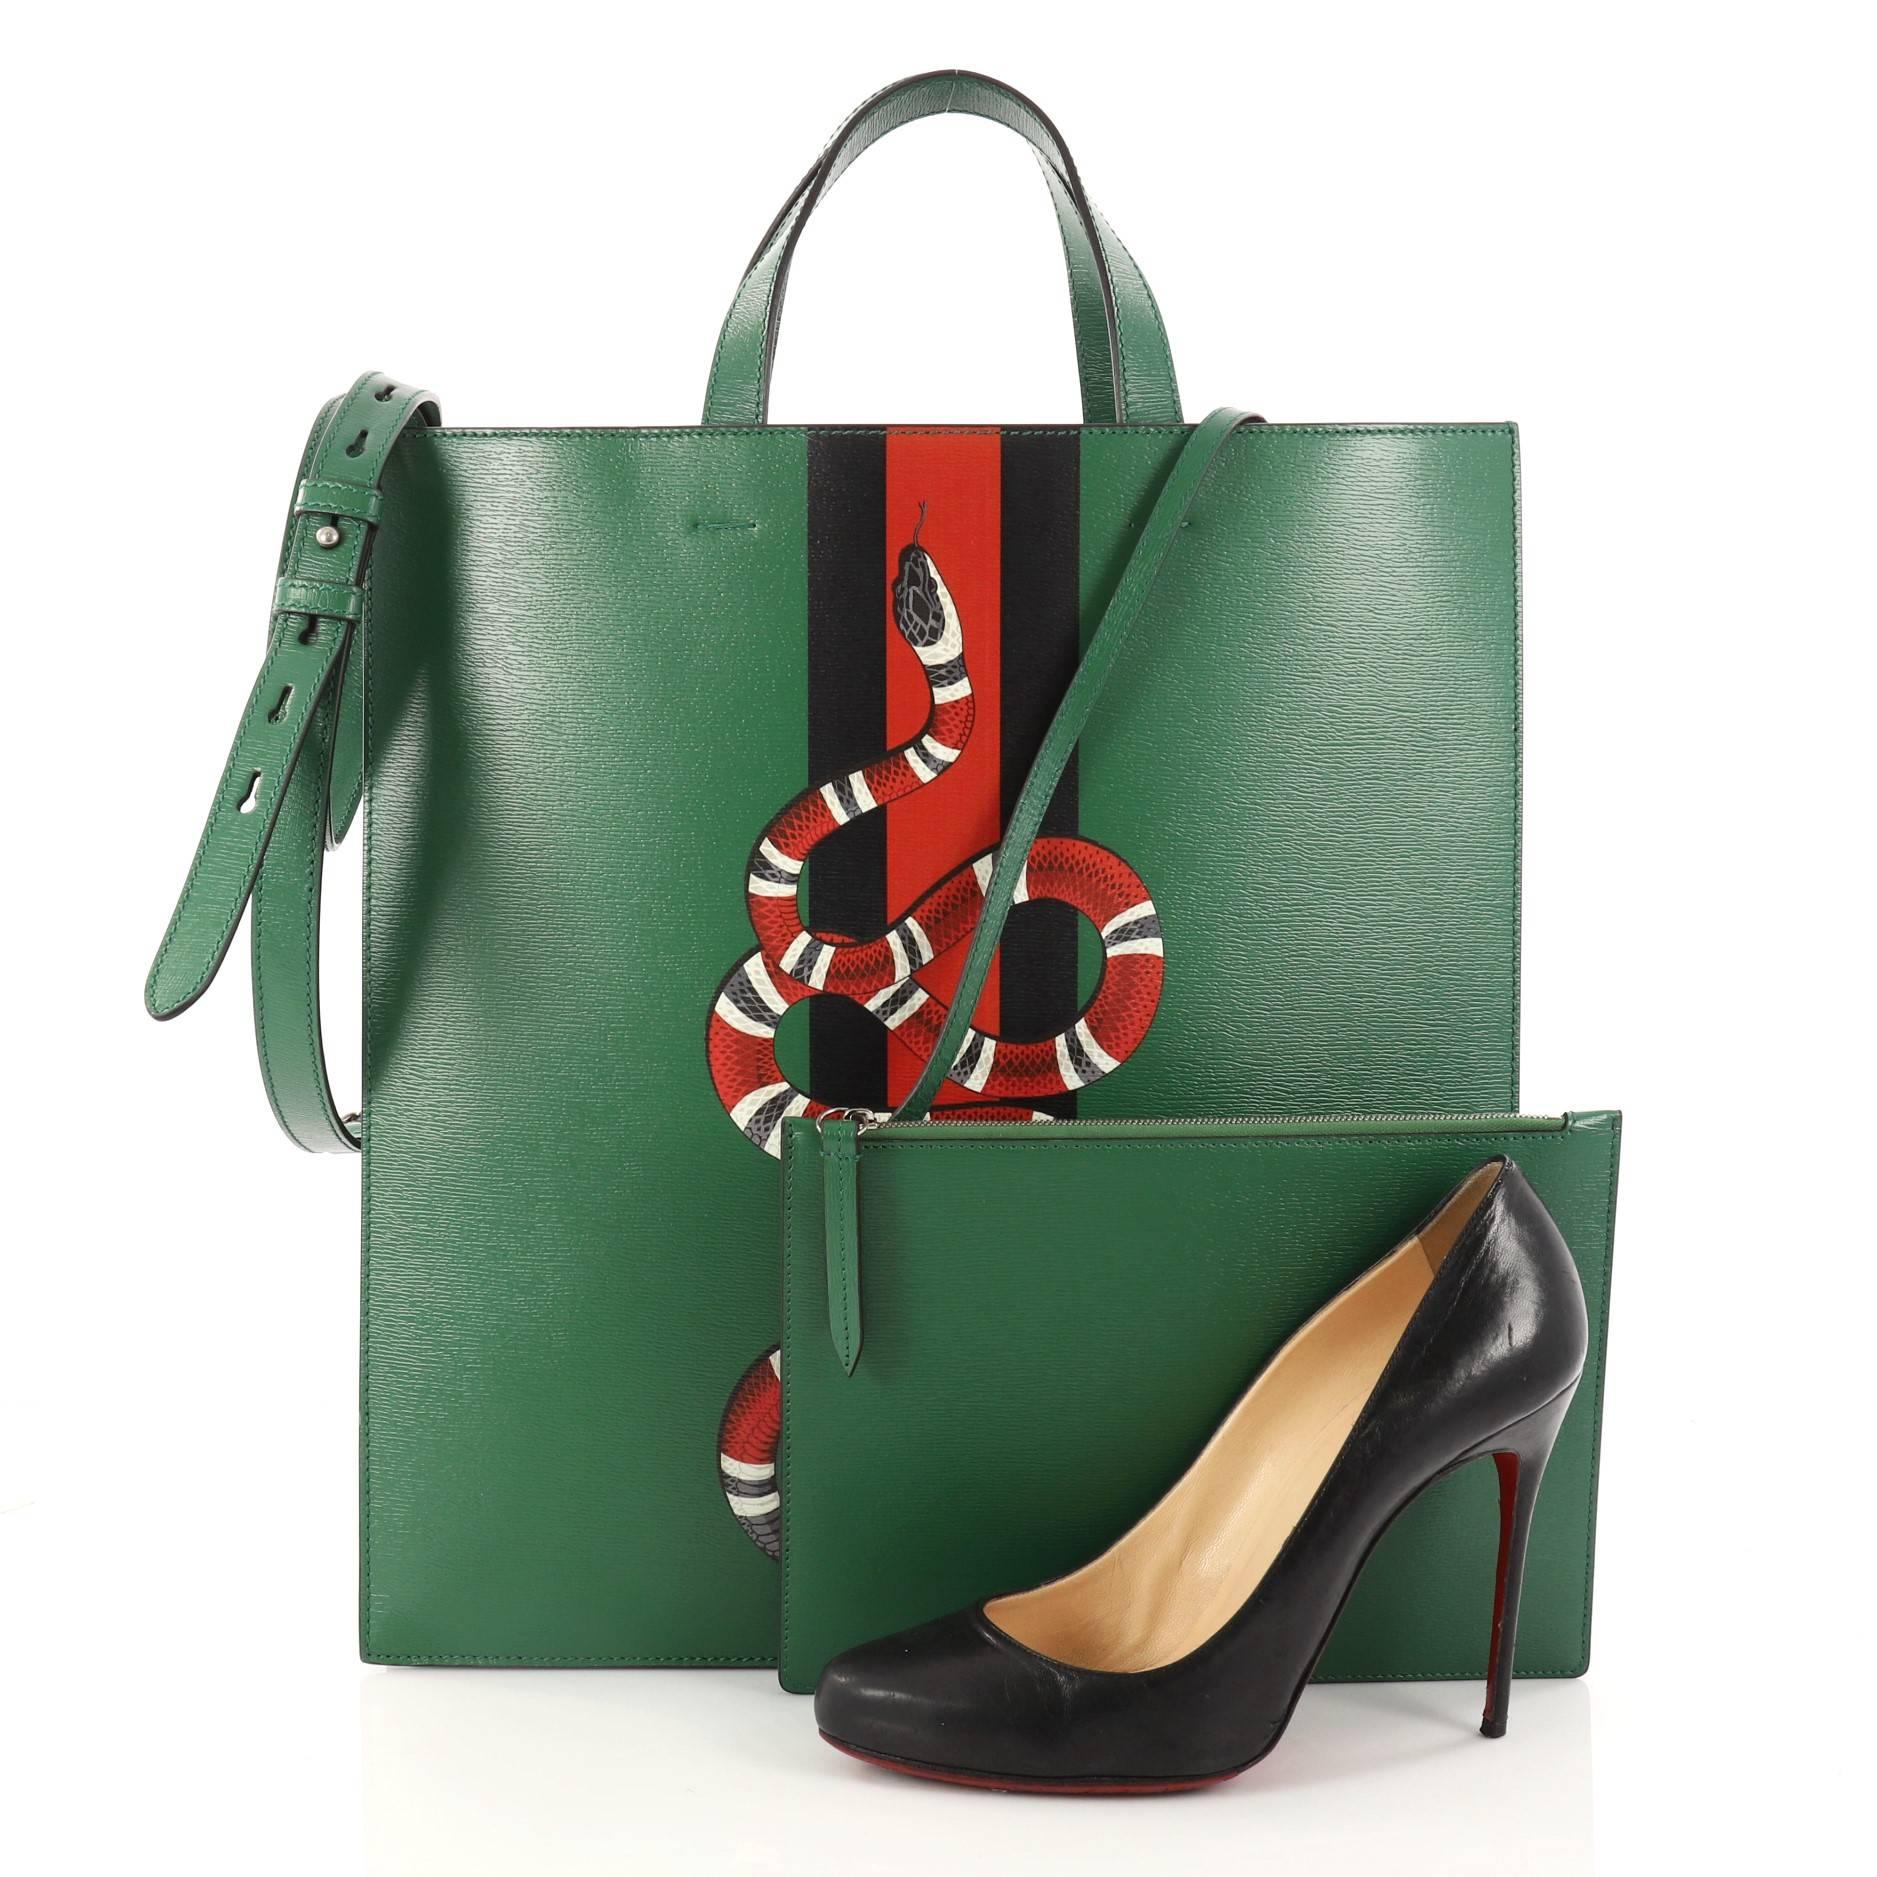 This authentic Gucci Web and Snake Convertible Soft Open Tote Printed Leather Tall is a stylish bag designed to be worn multiple ways. Crafted in green leather, this chic bag features two iconic Gucci motifs: the House Web in green/red and the